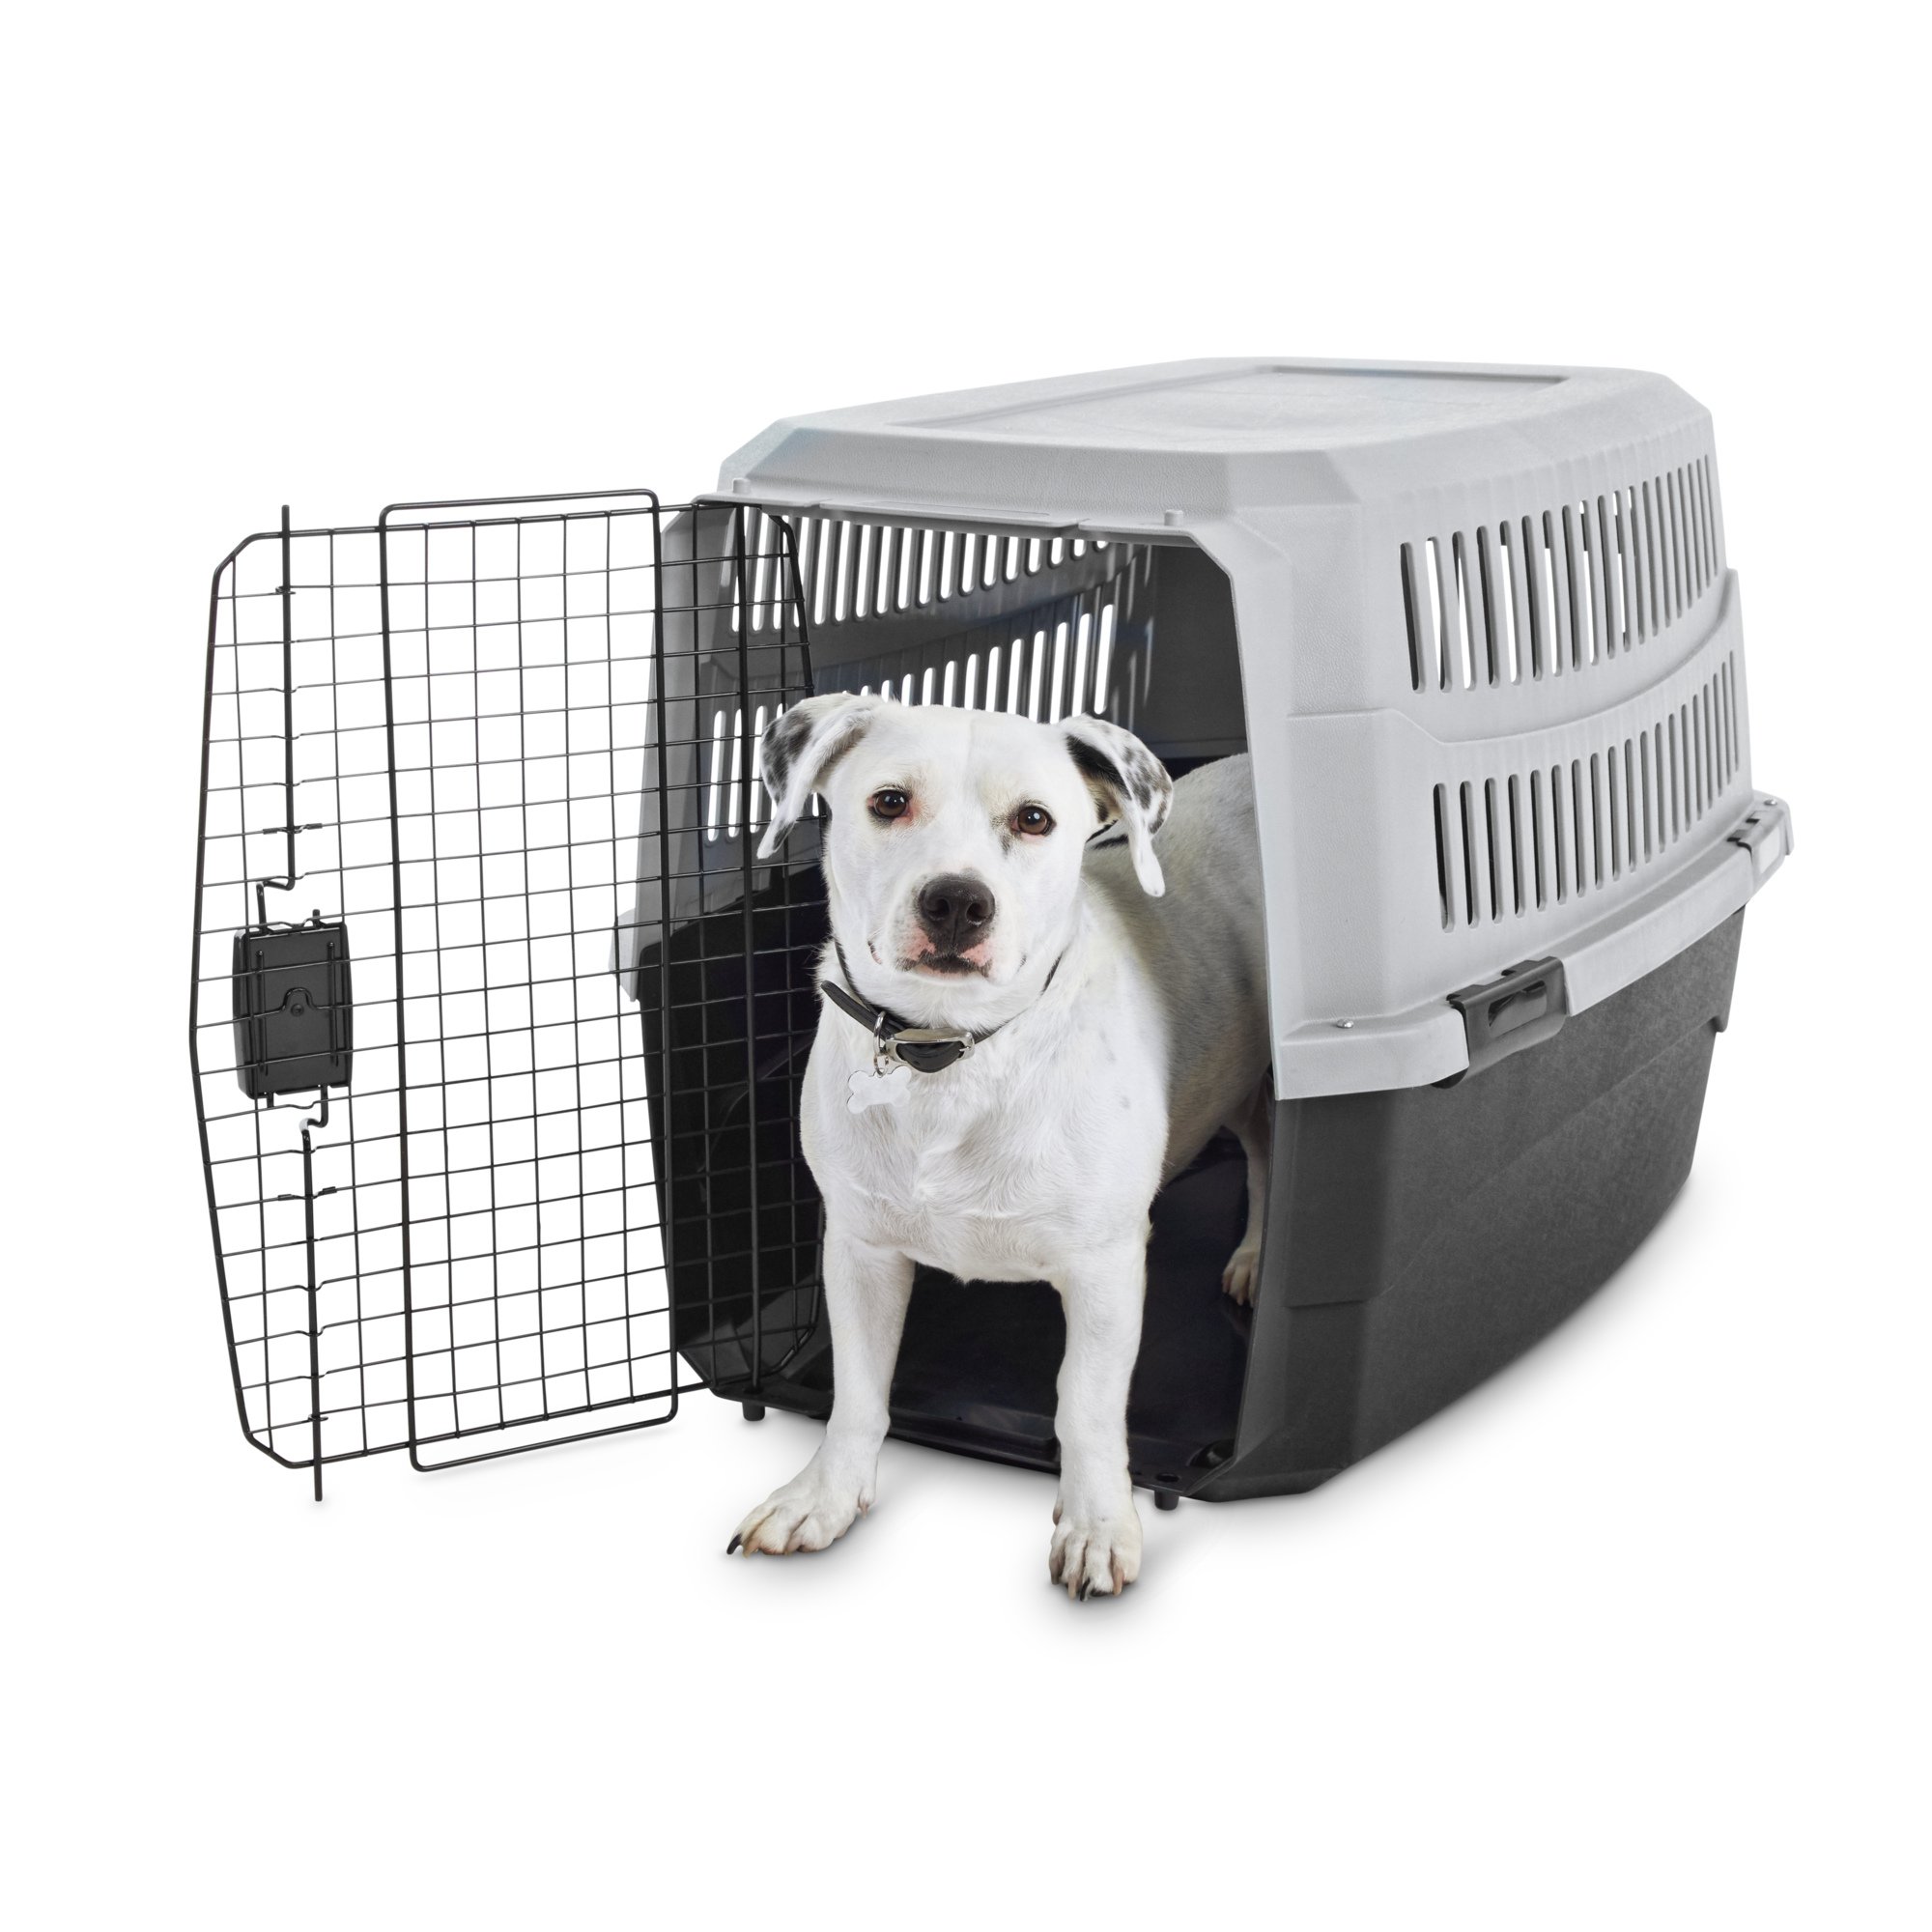 Animaze Standard Kennel for Dogs or Cats, 36